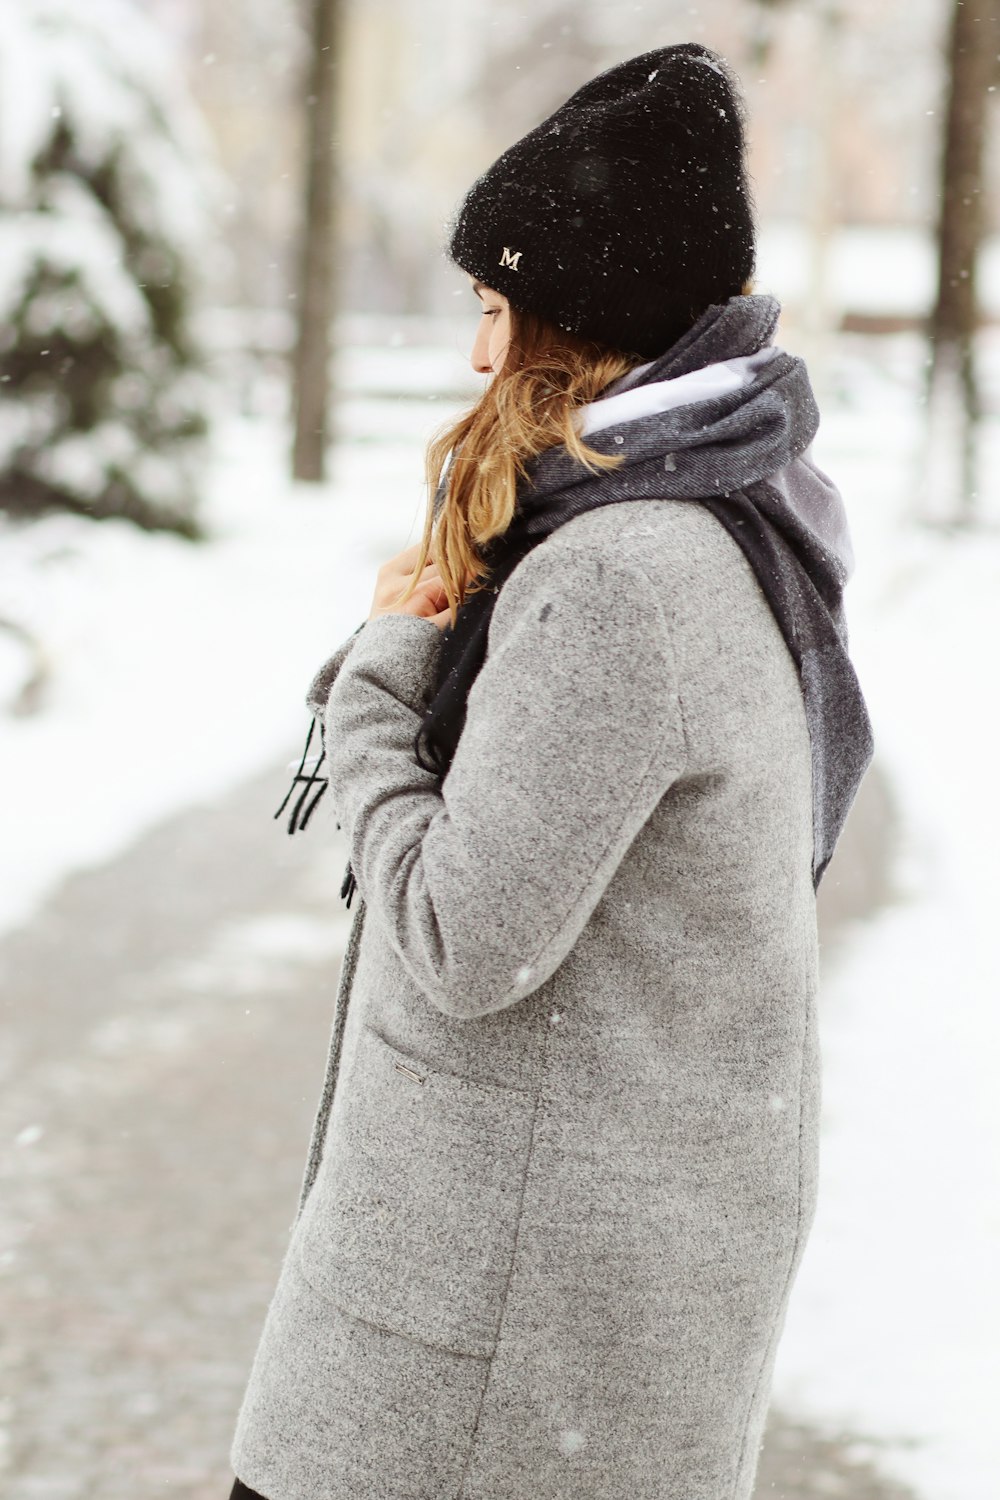 Person in gray knit cap and brown hoodie photo – Free Grey Image on Unsplash